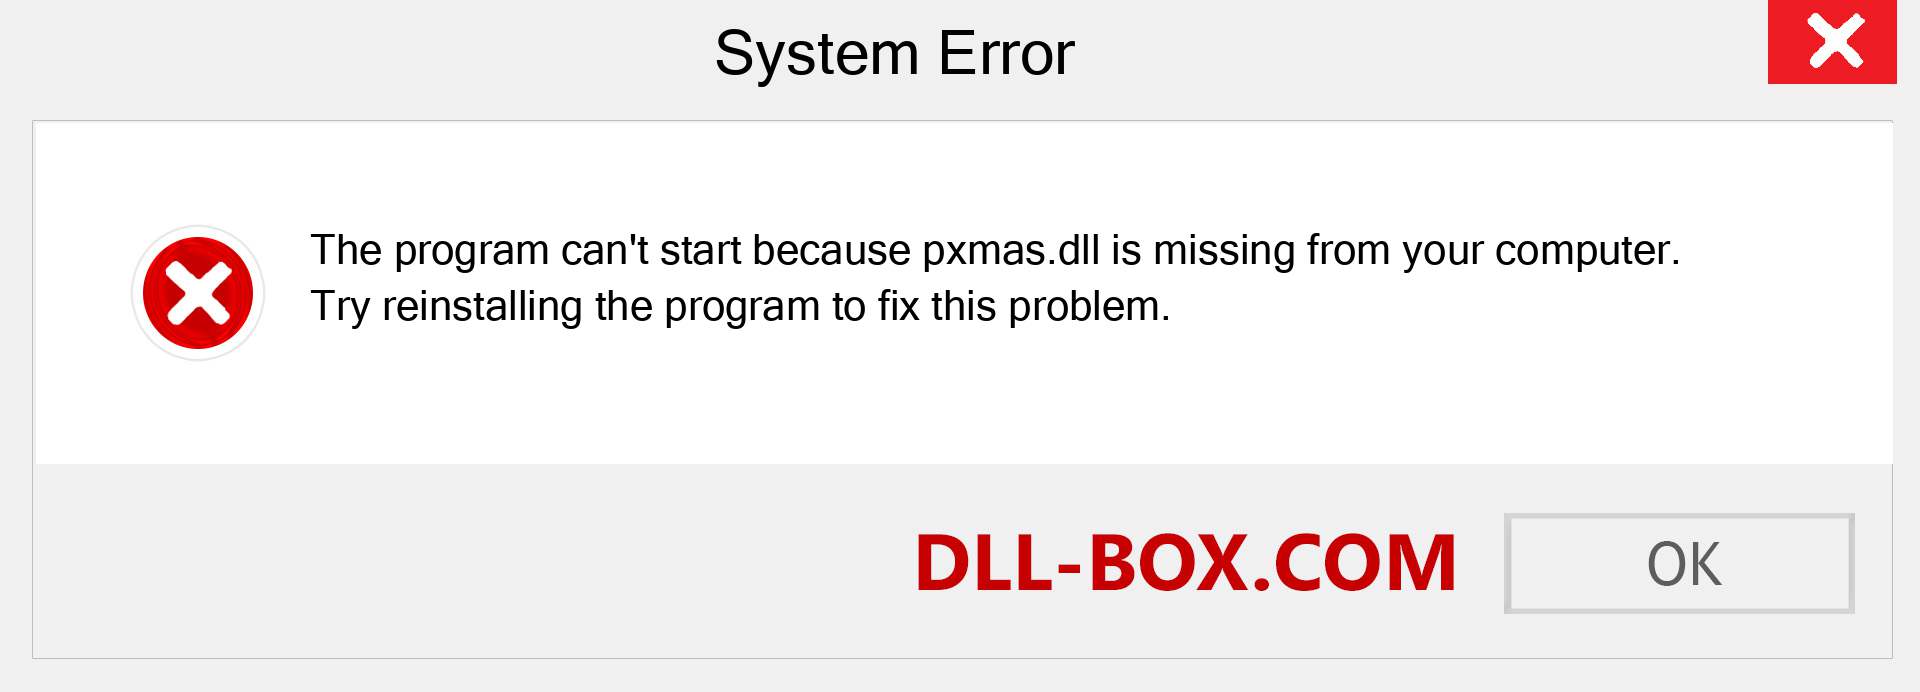  pxmas.dll file is missing?. Download for Windows 7, 8, 10 - Fix  pxmas dll Missing Error on Windows, photos, images